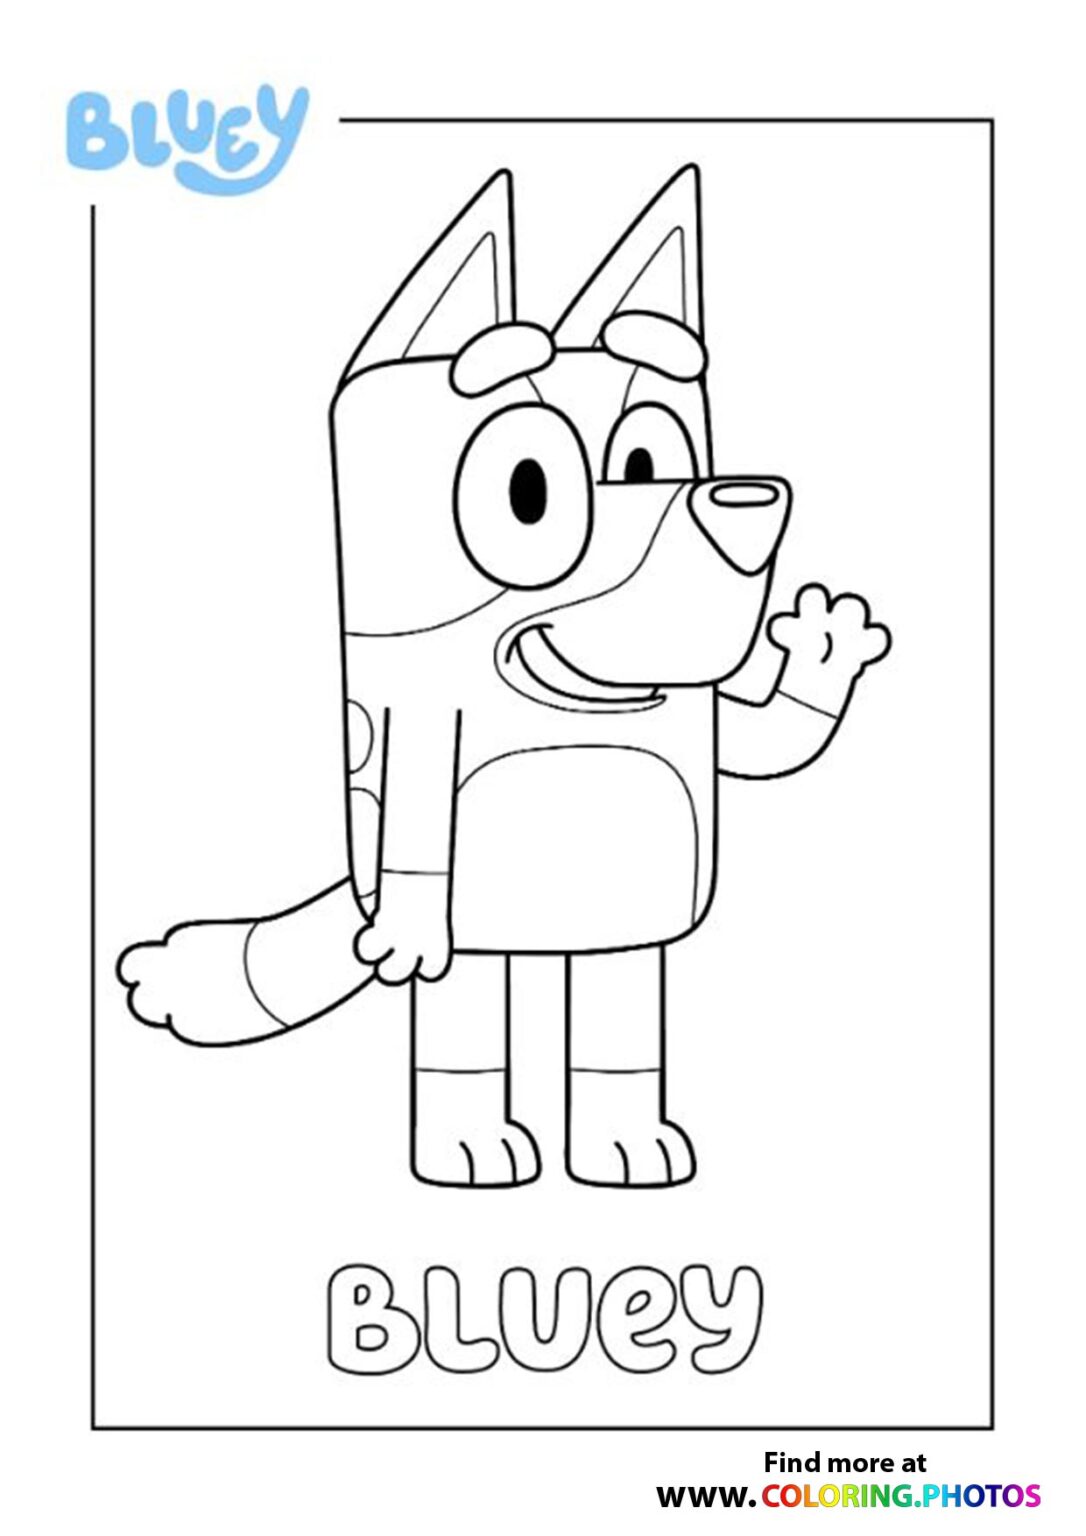 bluey-coloring-pages-free-printable-coloring-pages-for-kids